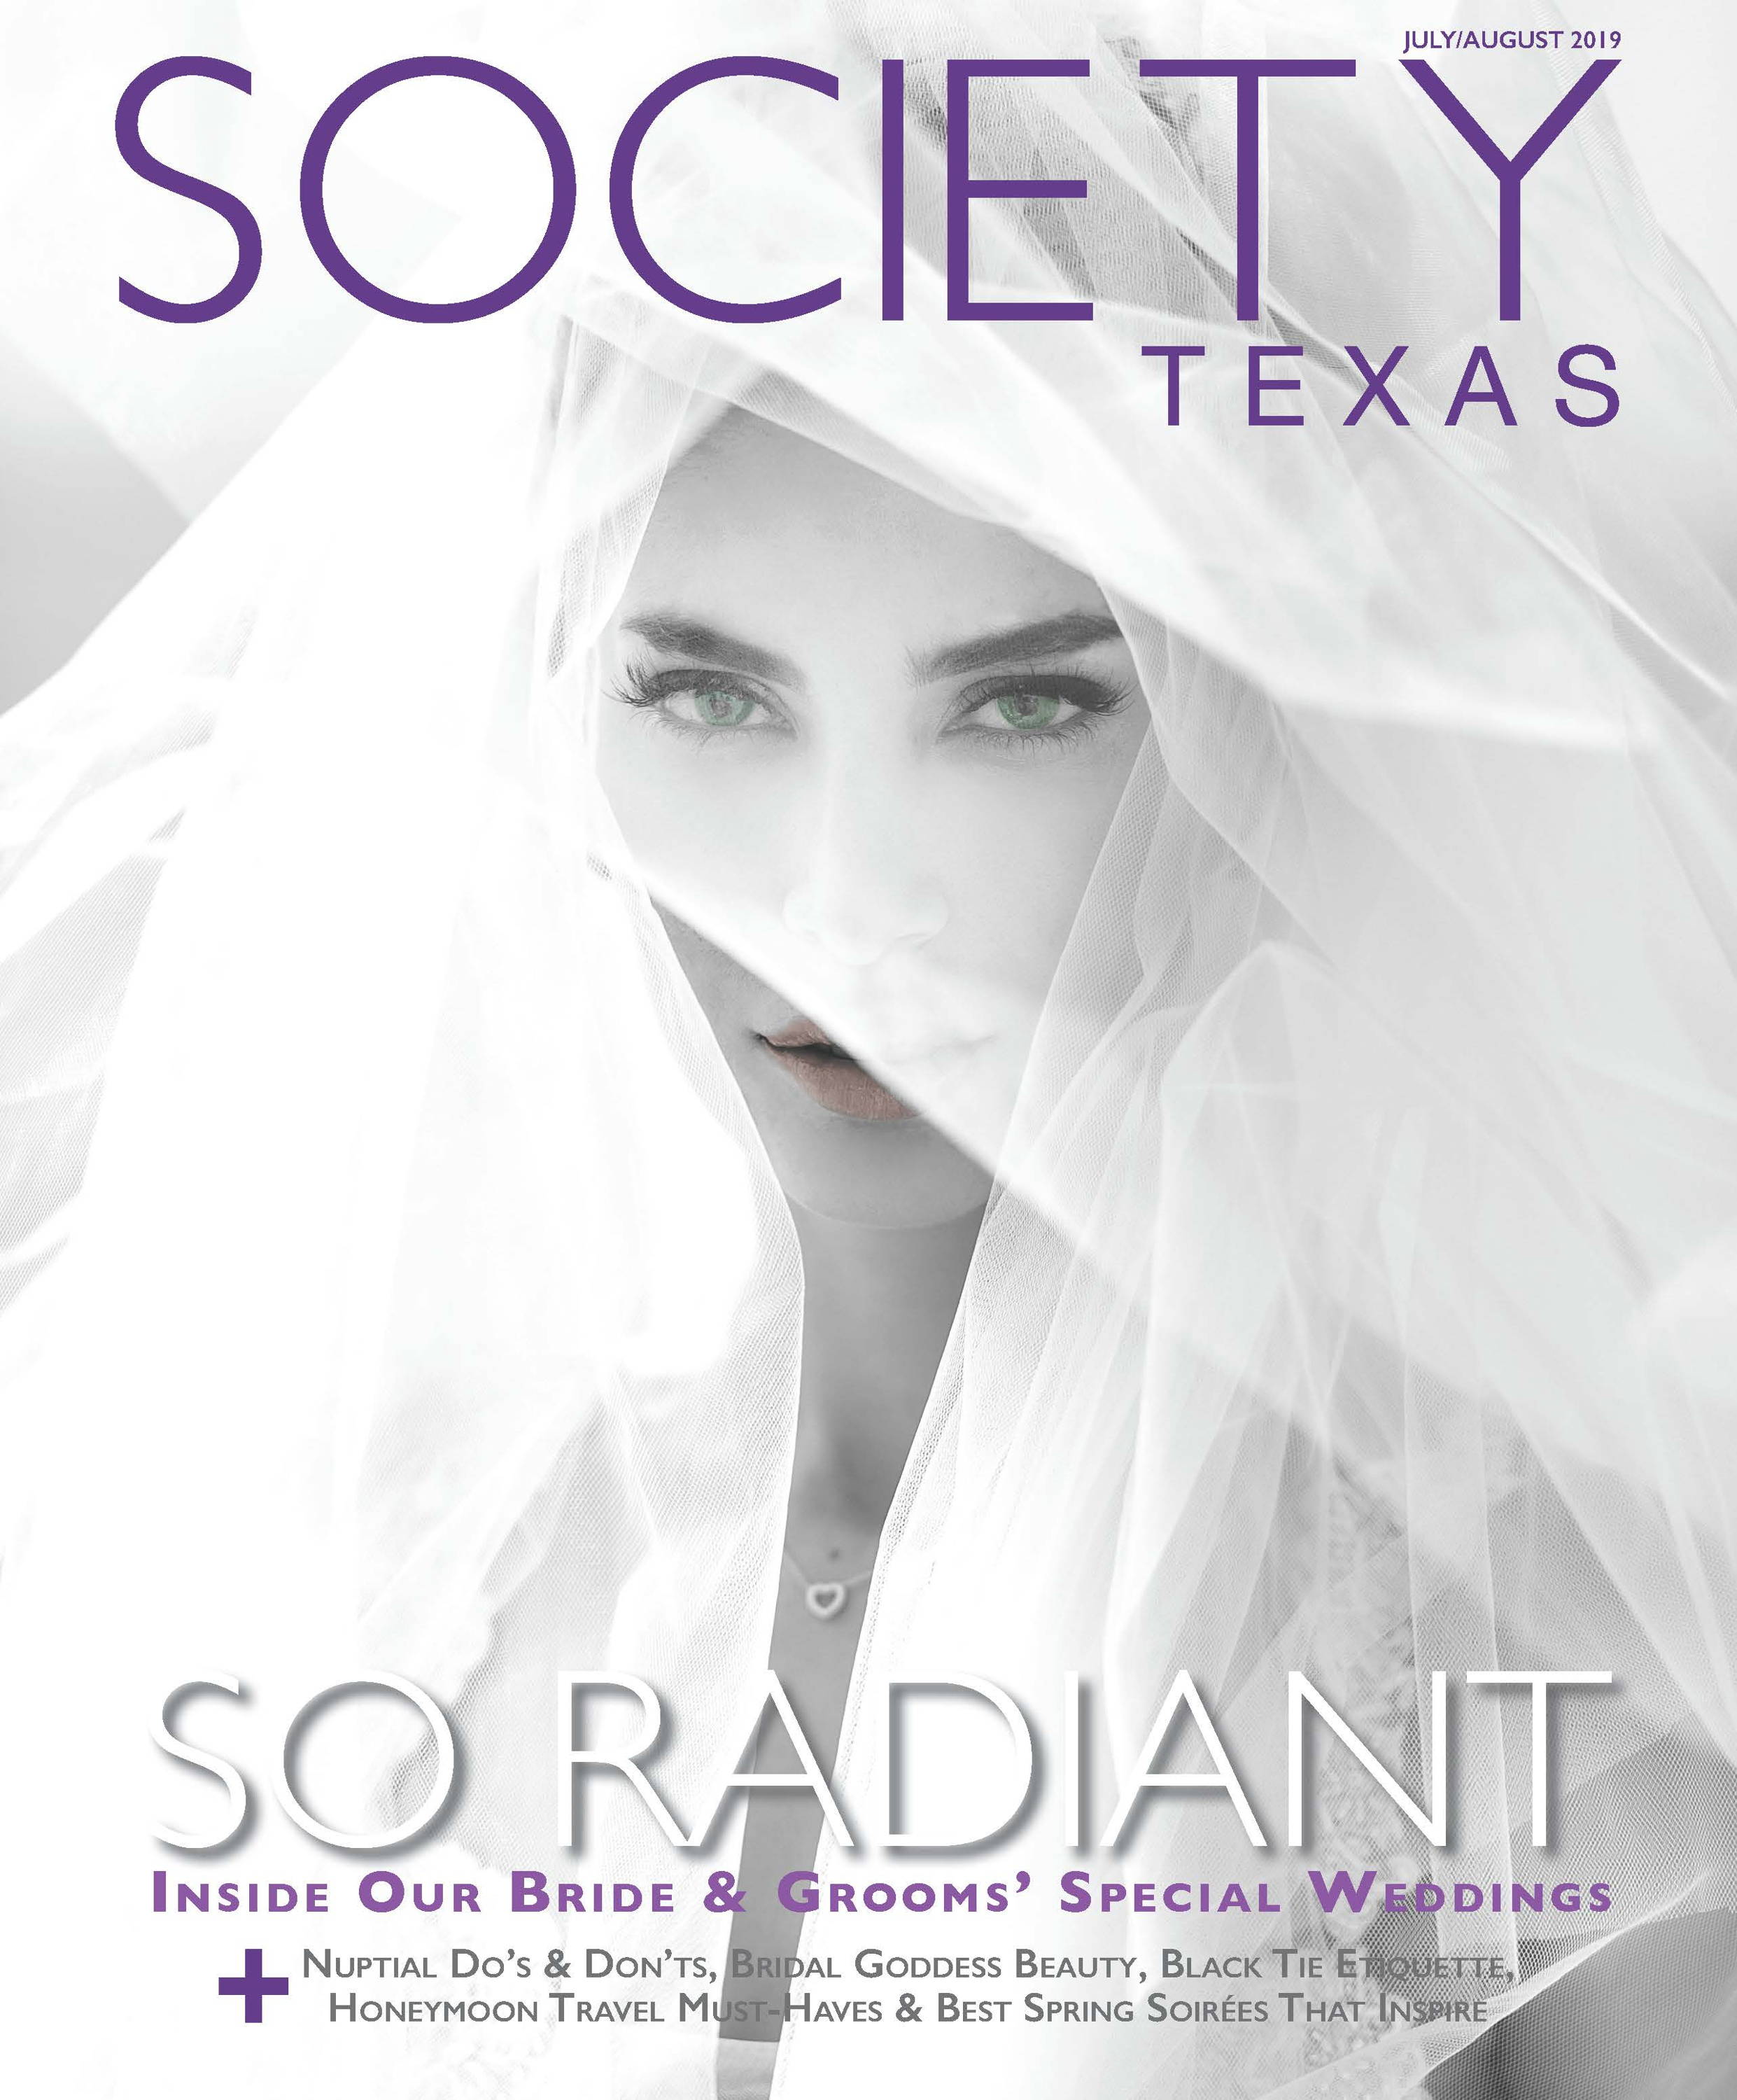 Society Texas July August 2019 Cover page 1